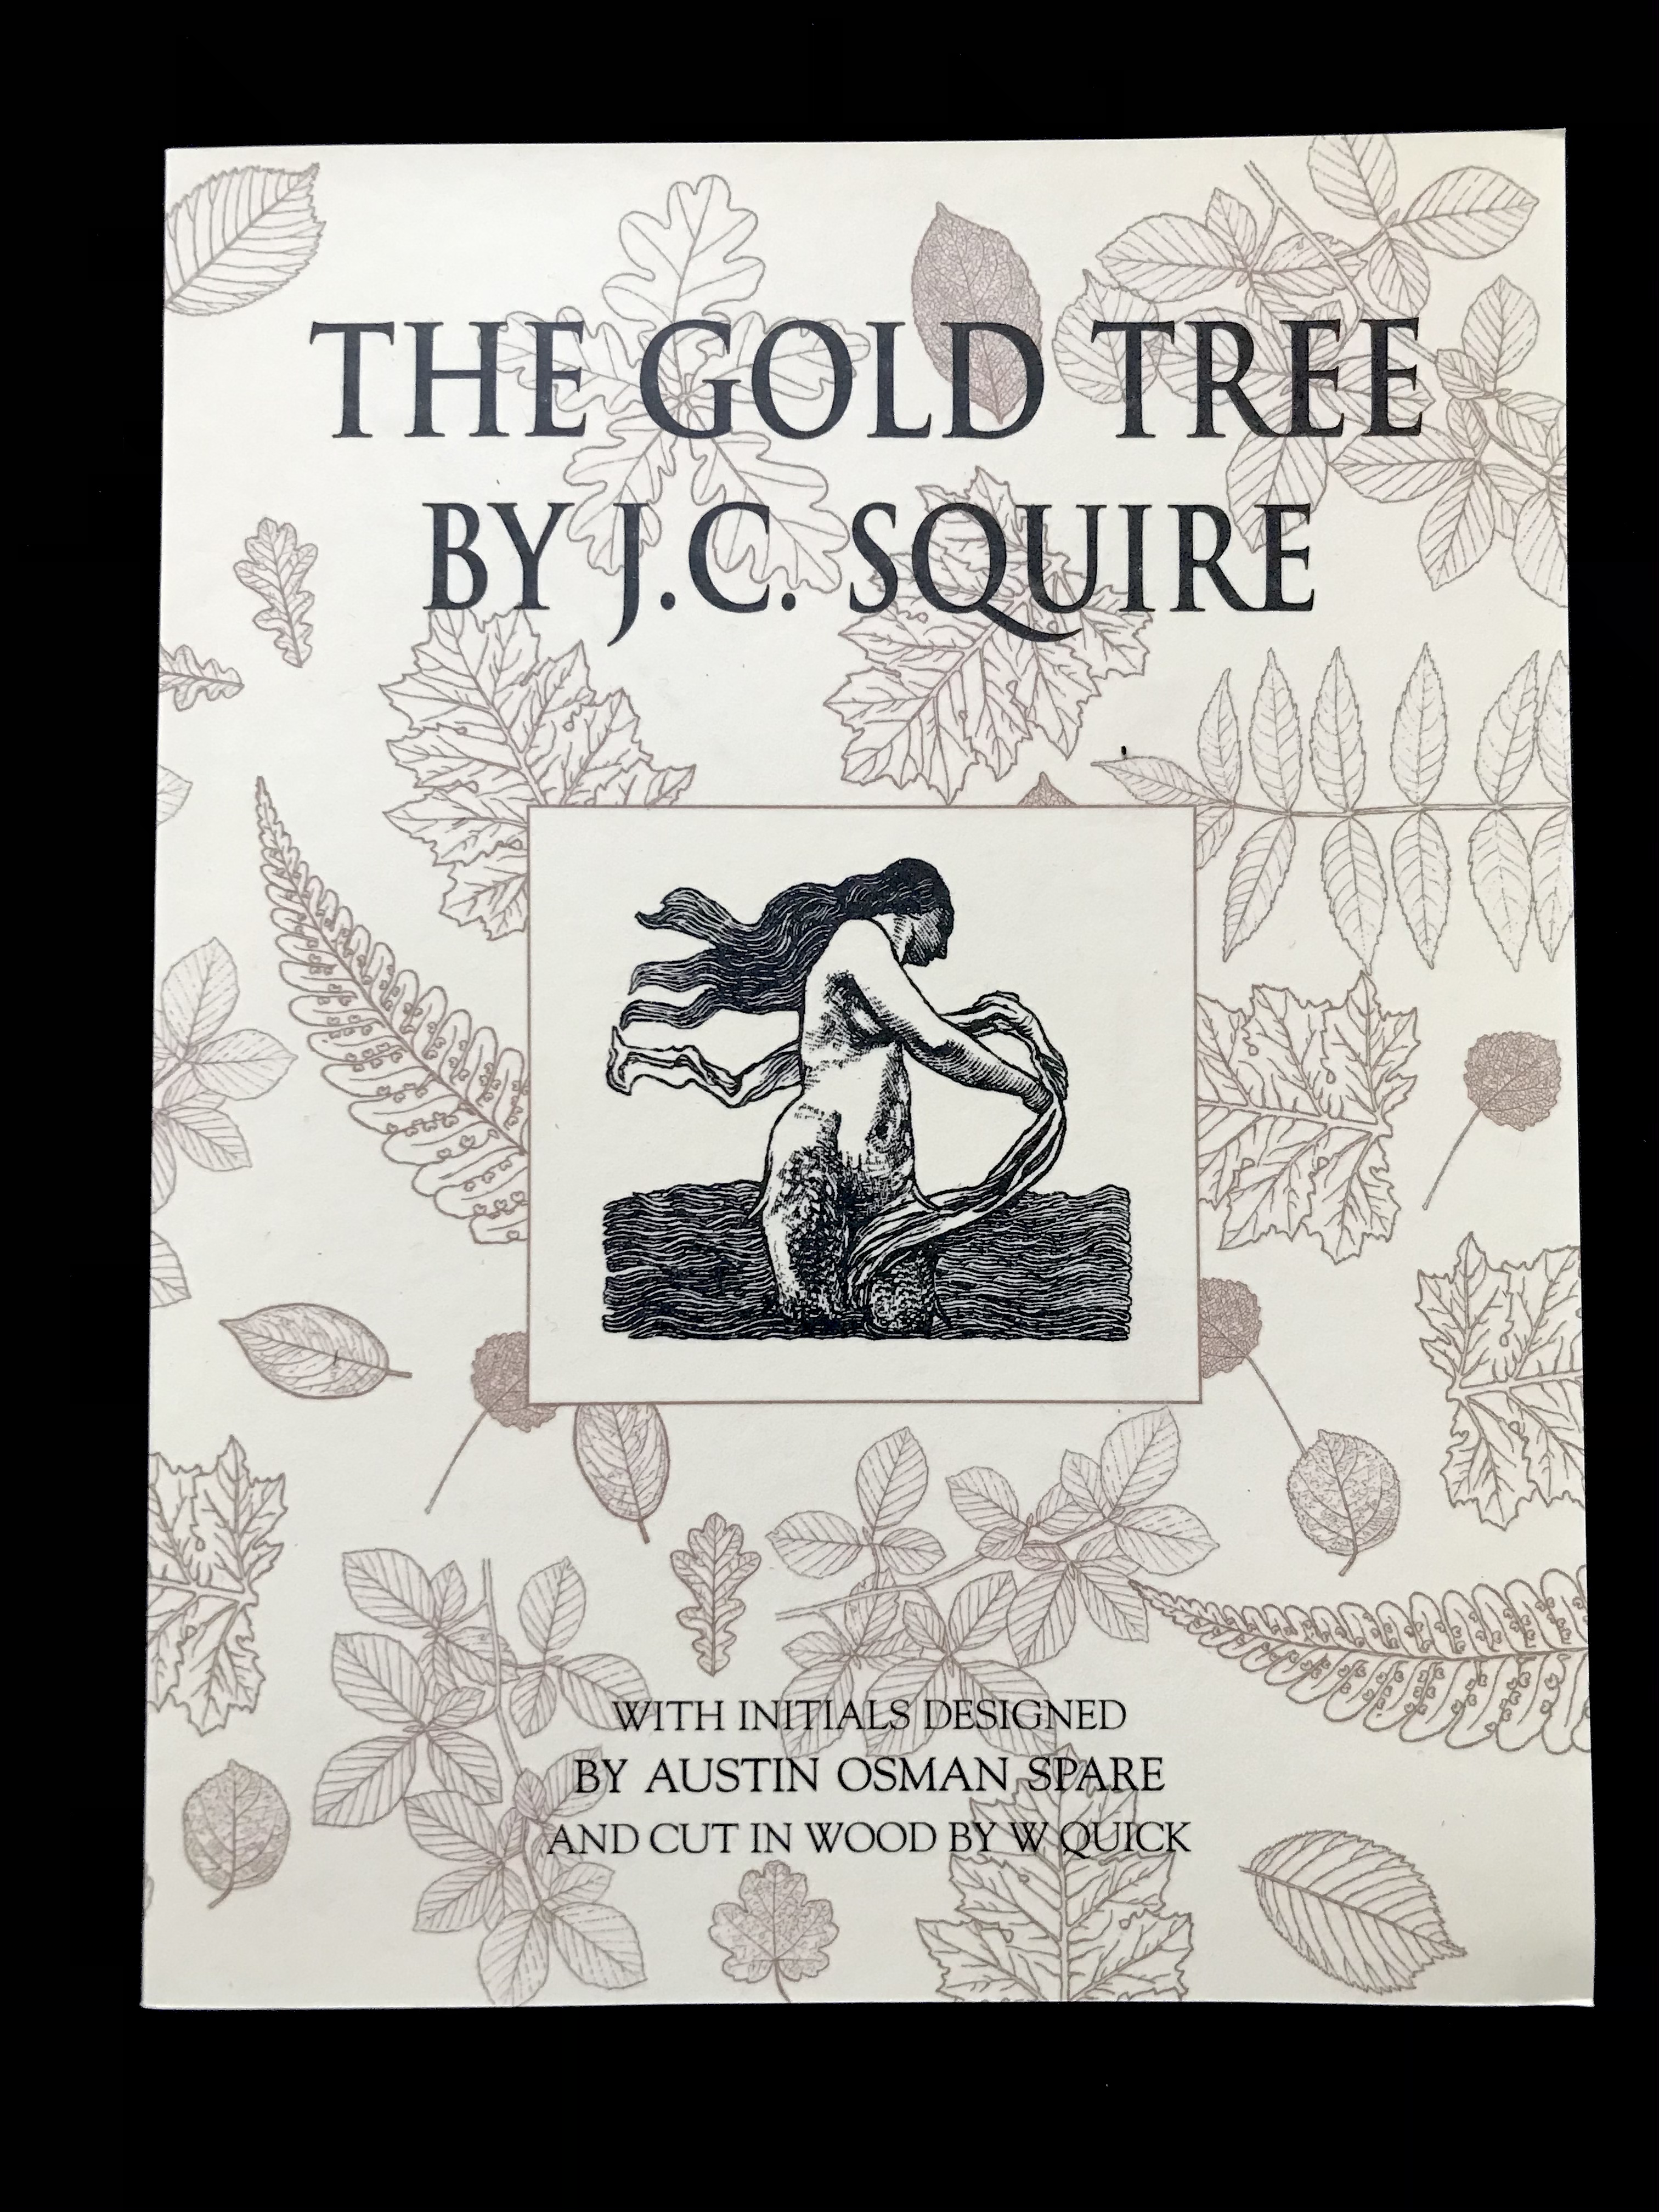 The Gold Tree by J. C. Squire